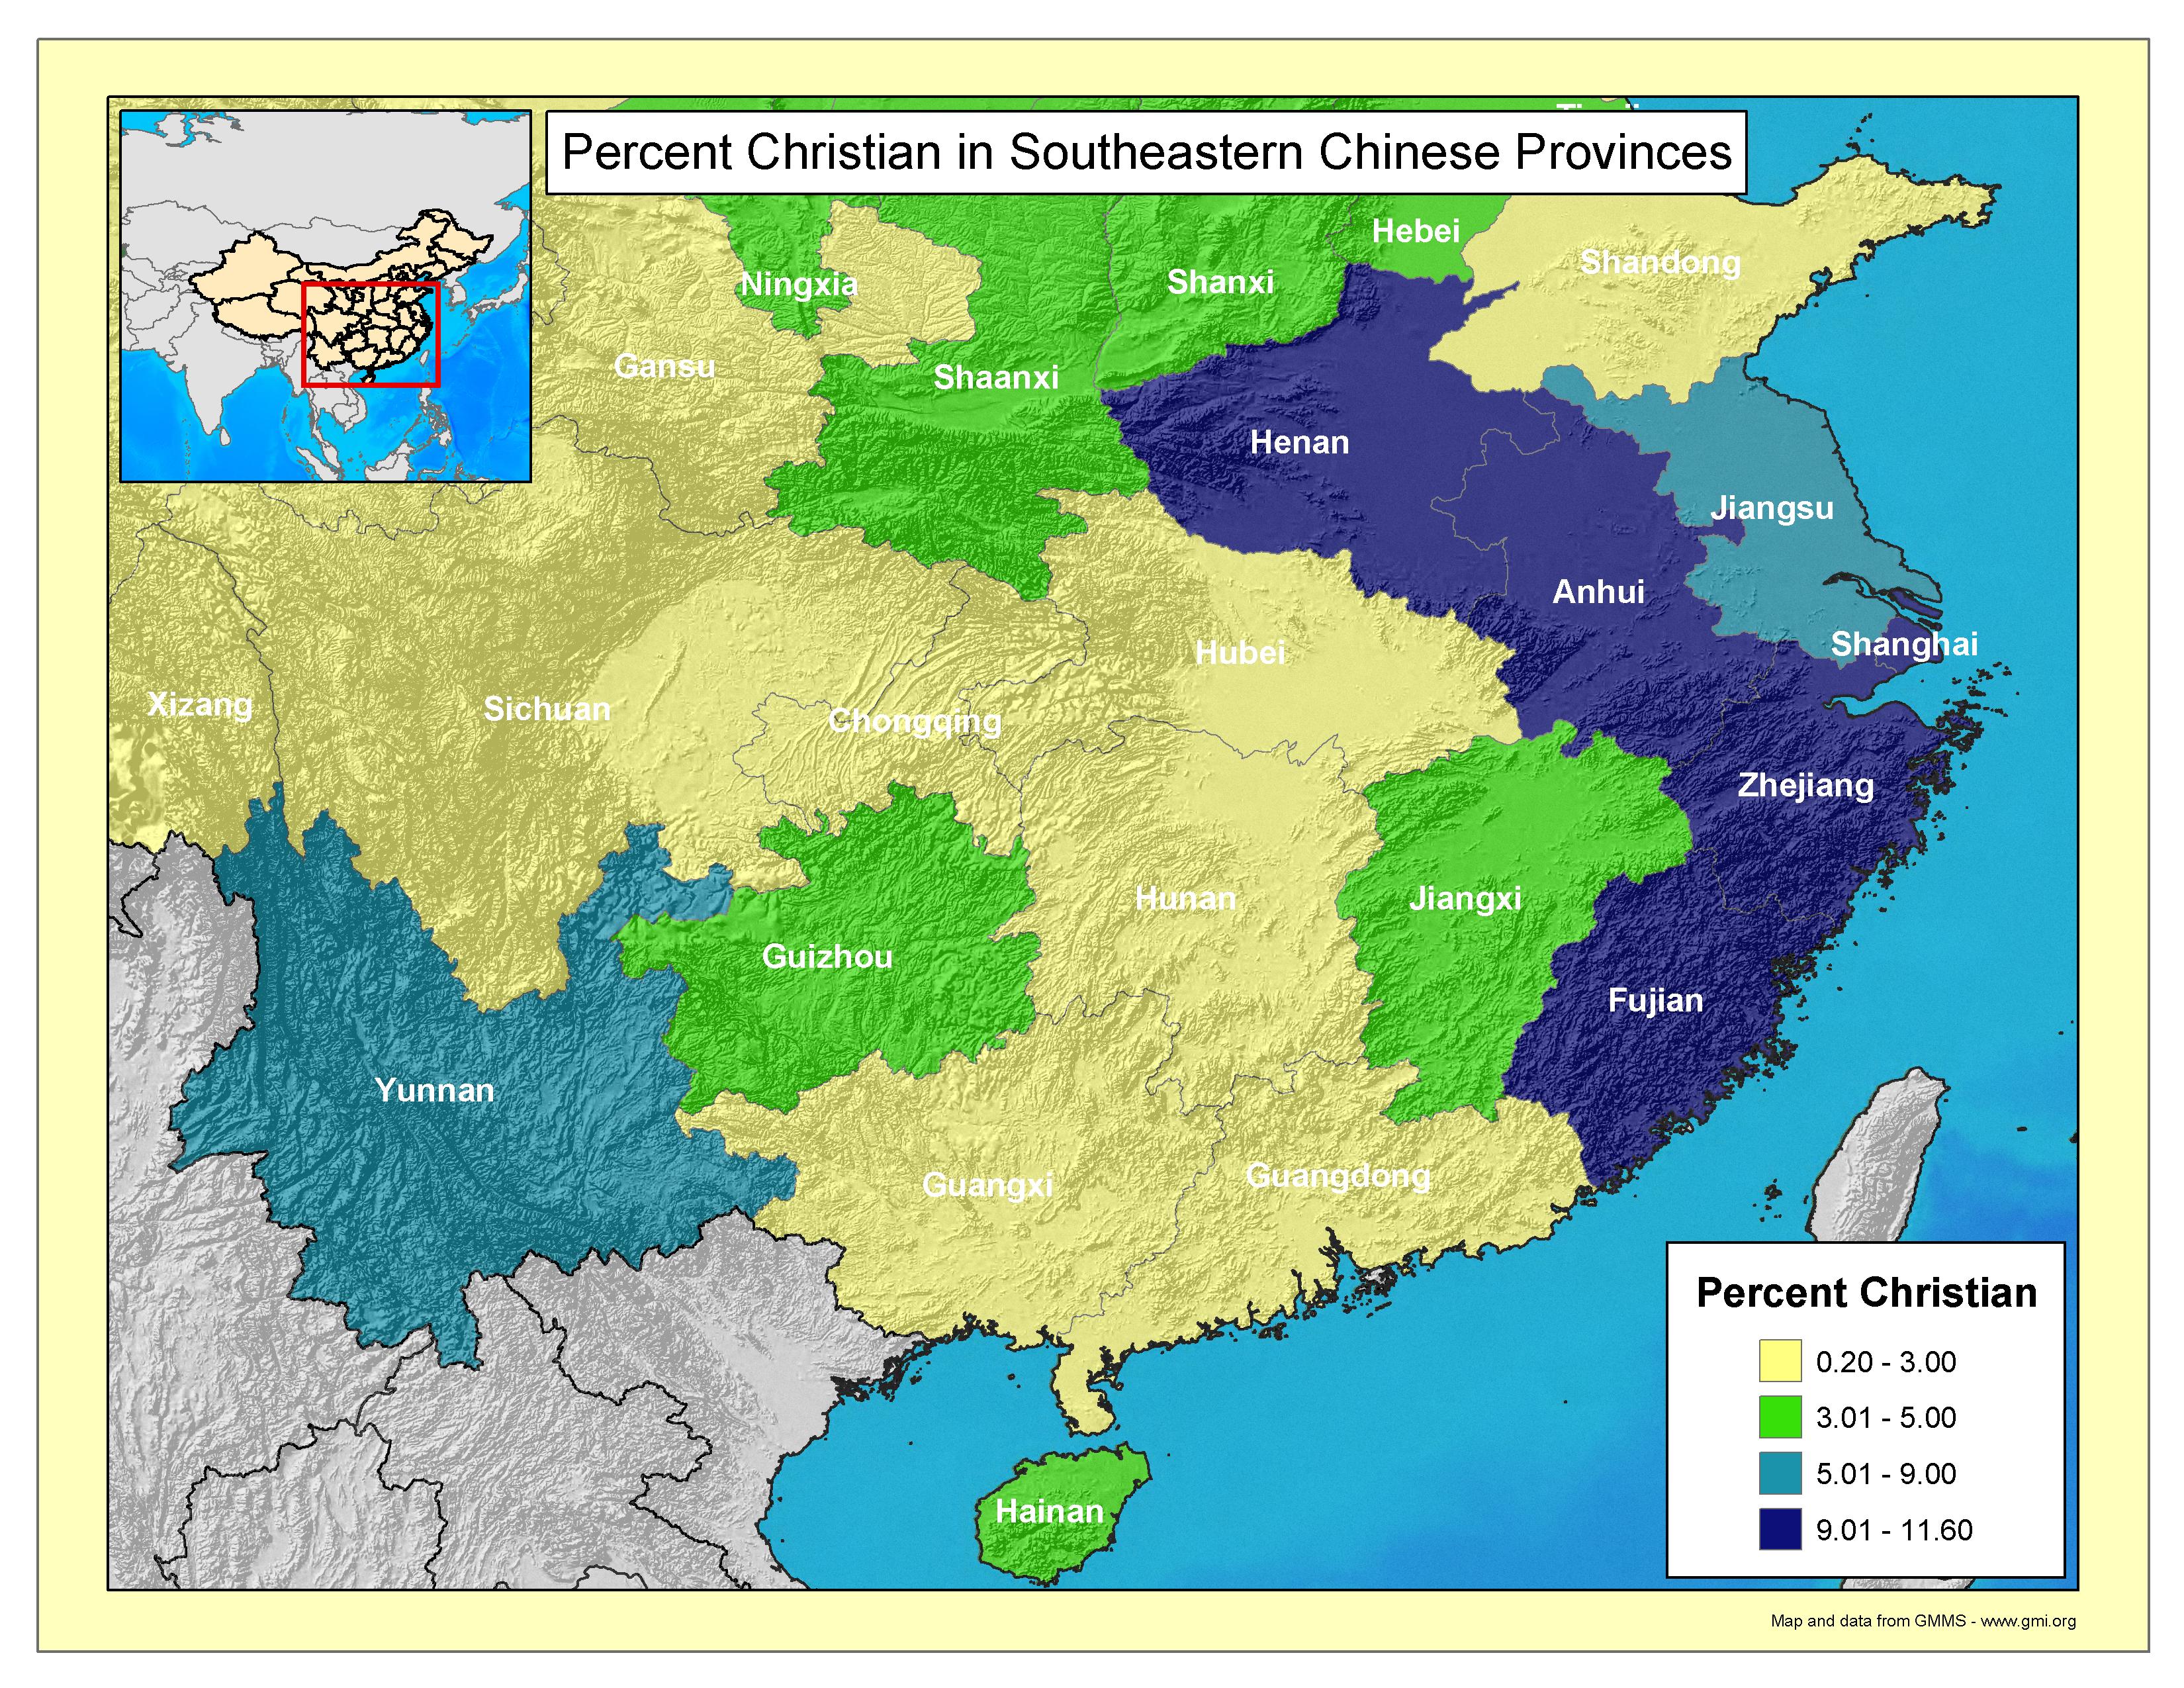 Percent Christian in Southeastern Chinese Provinces